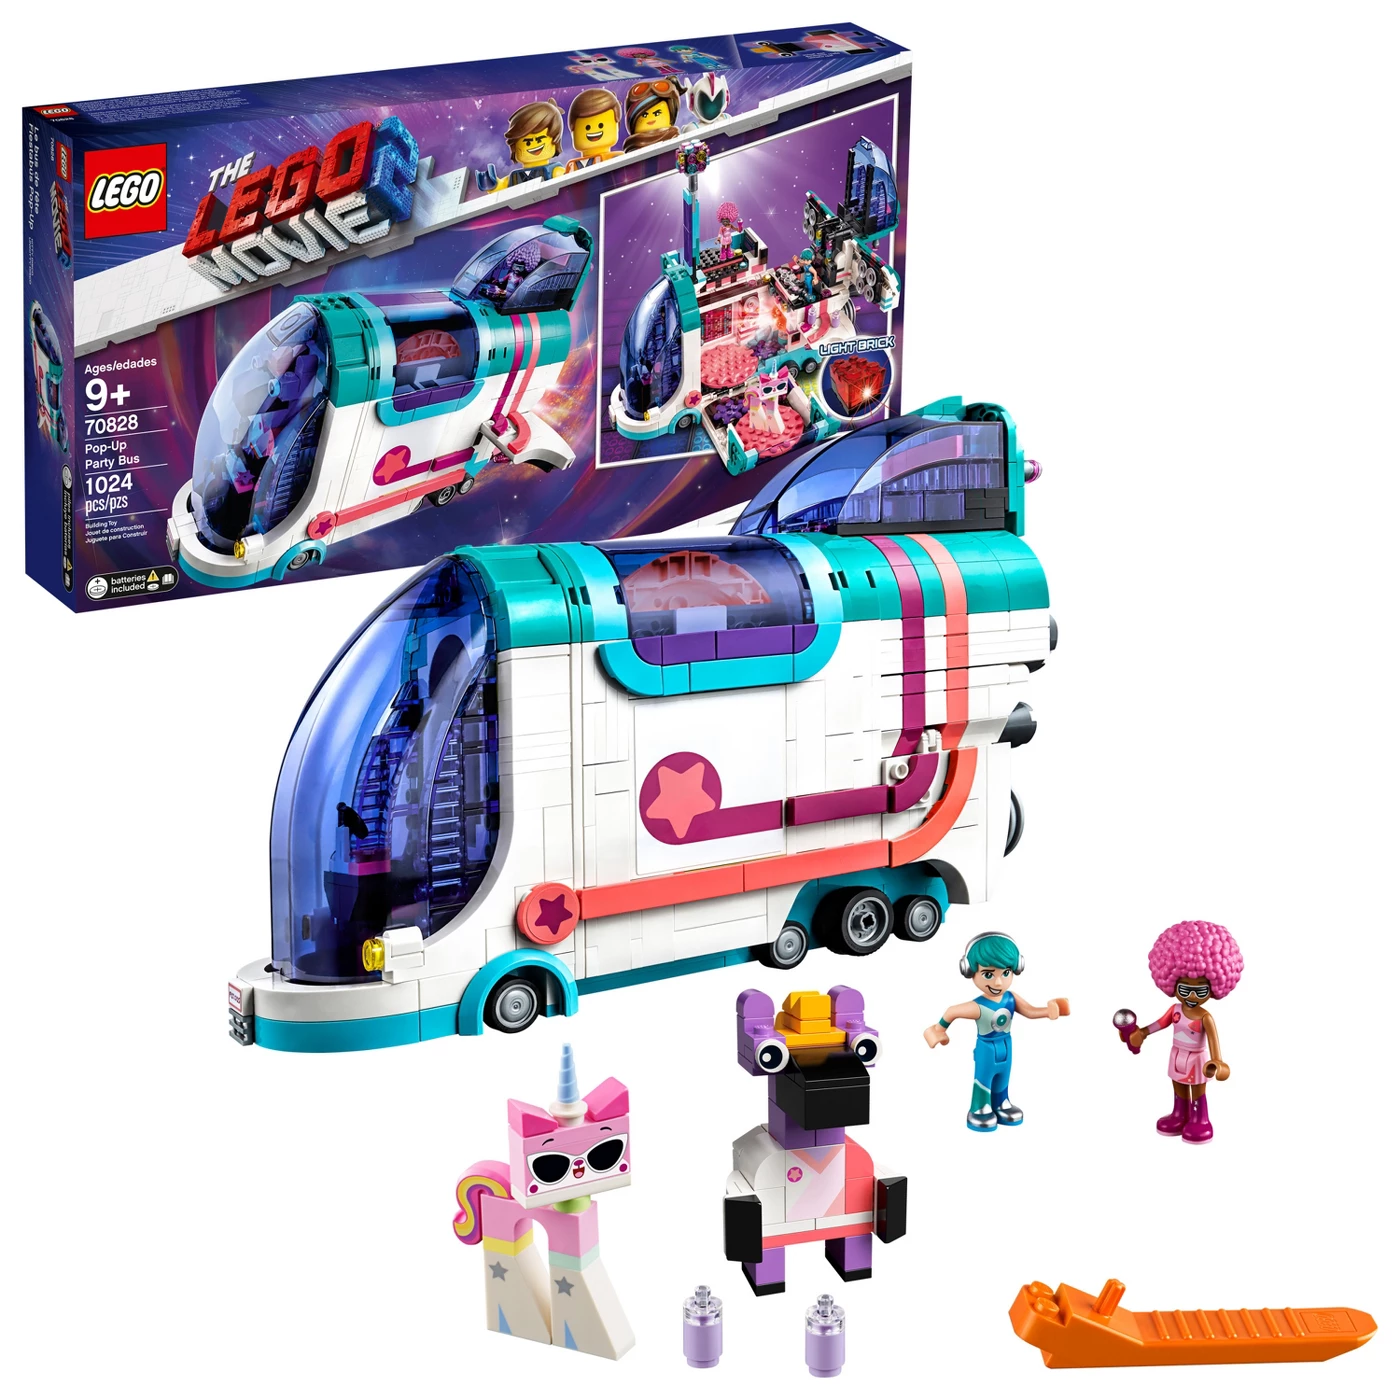 THE LEGO MOVIE 2 Pop-Up Party Bus 70828 - image 1 of 7